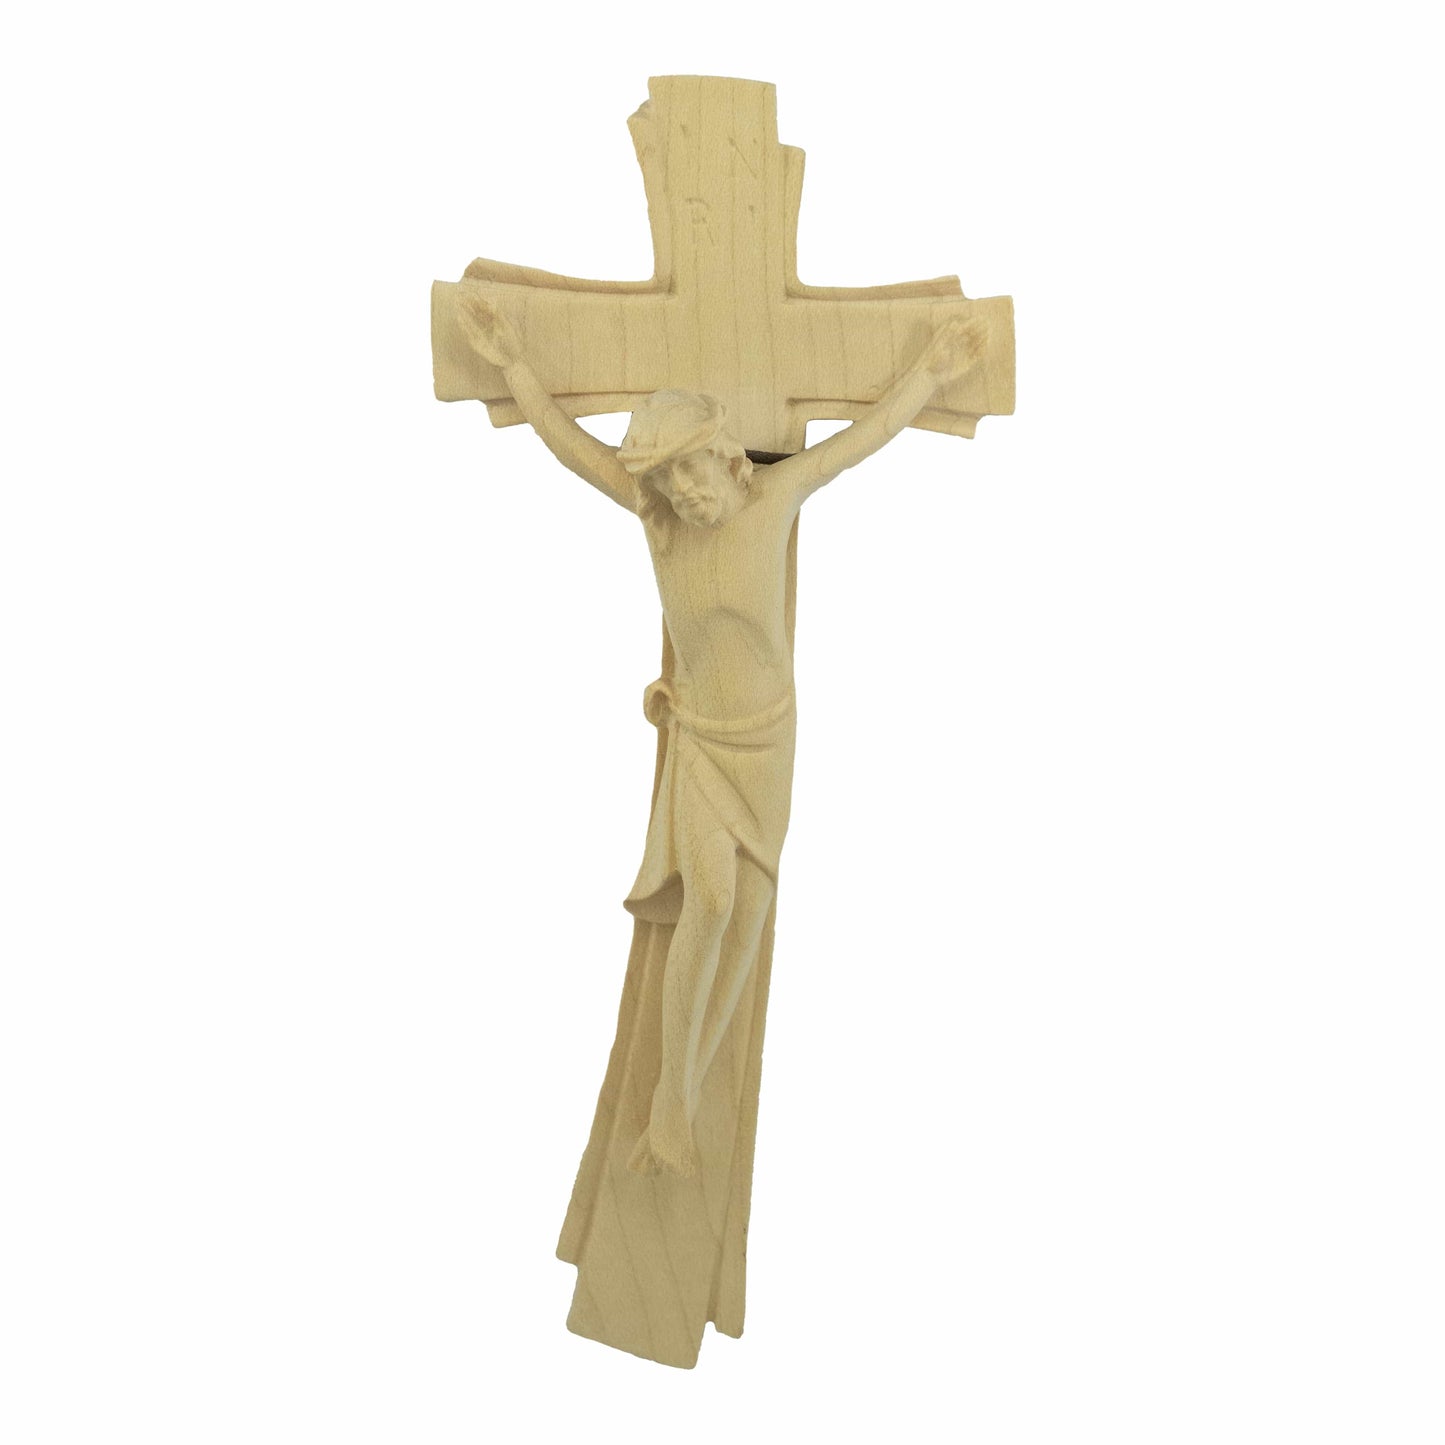 MONDO CATTOLICO 20 cm (7.87 in) Natural Wood Crucifix Modern Style